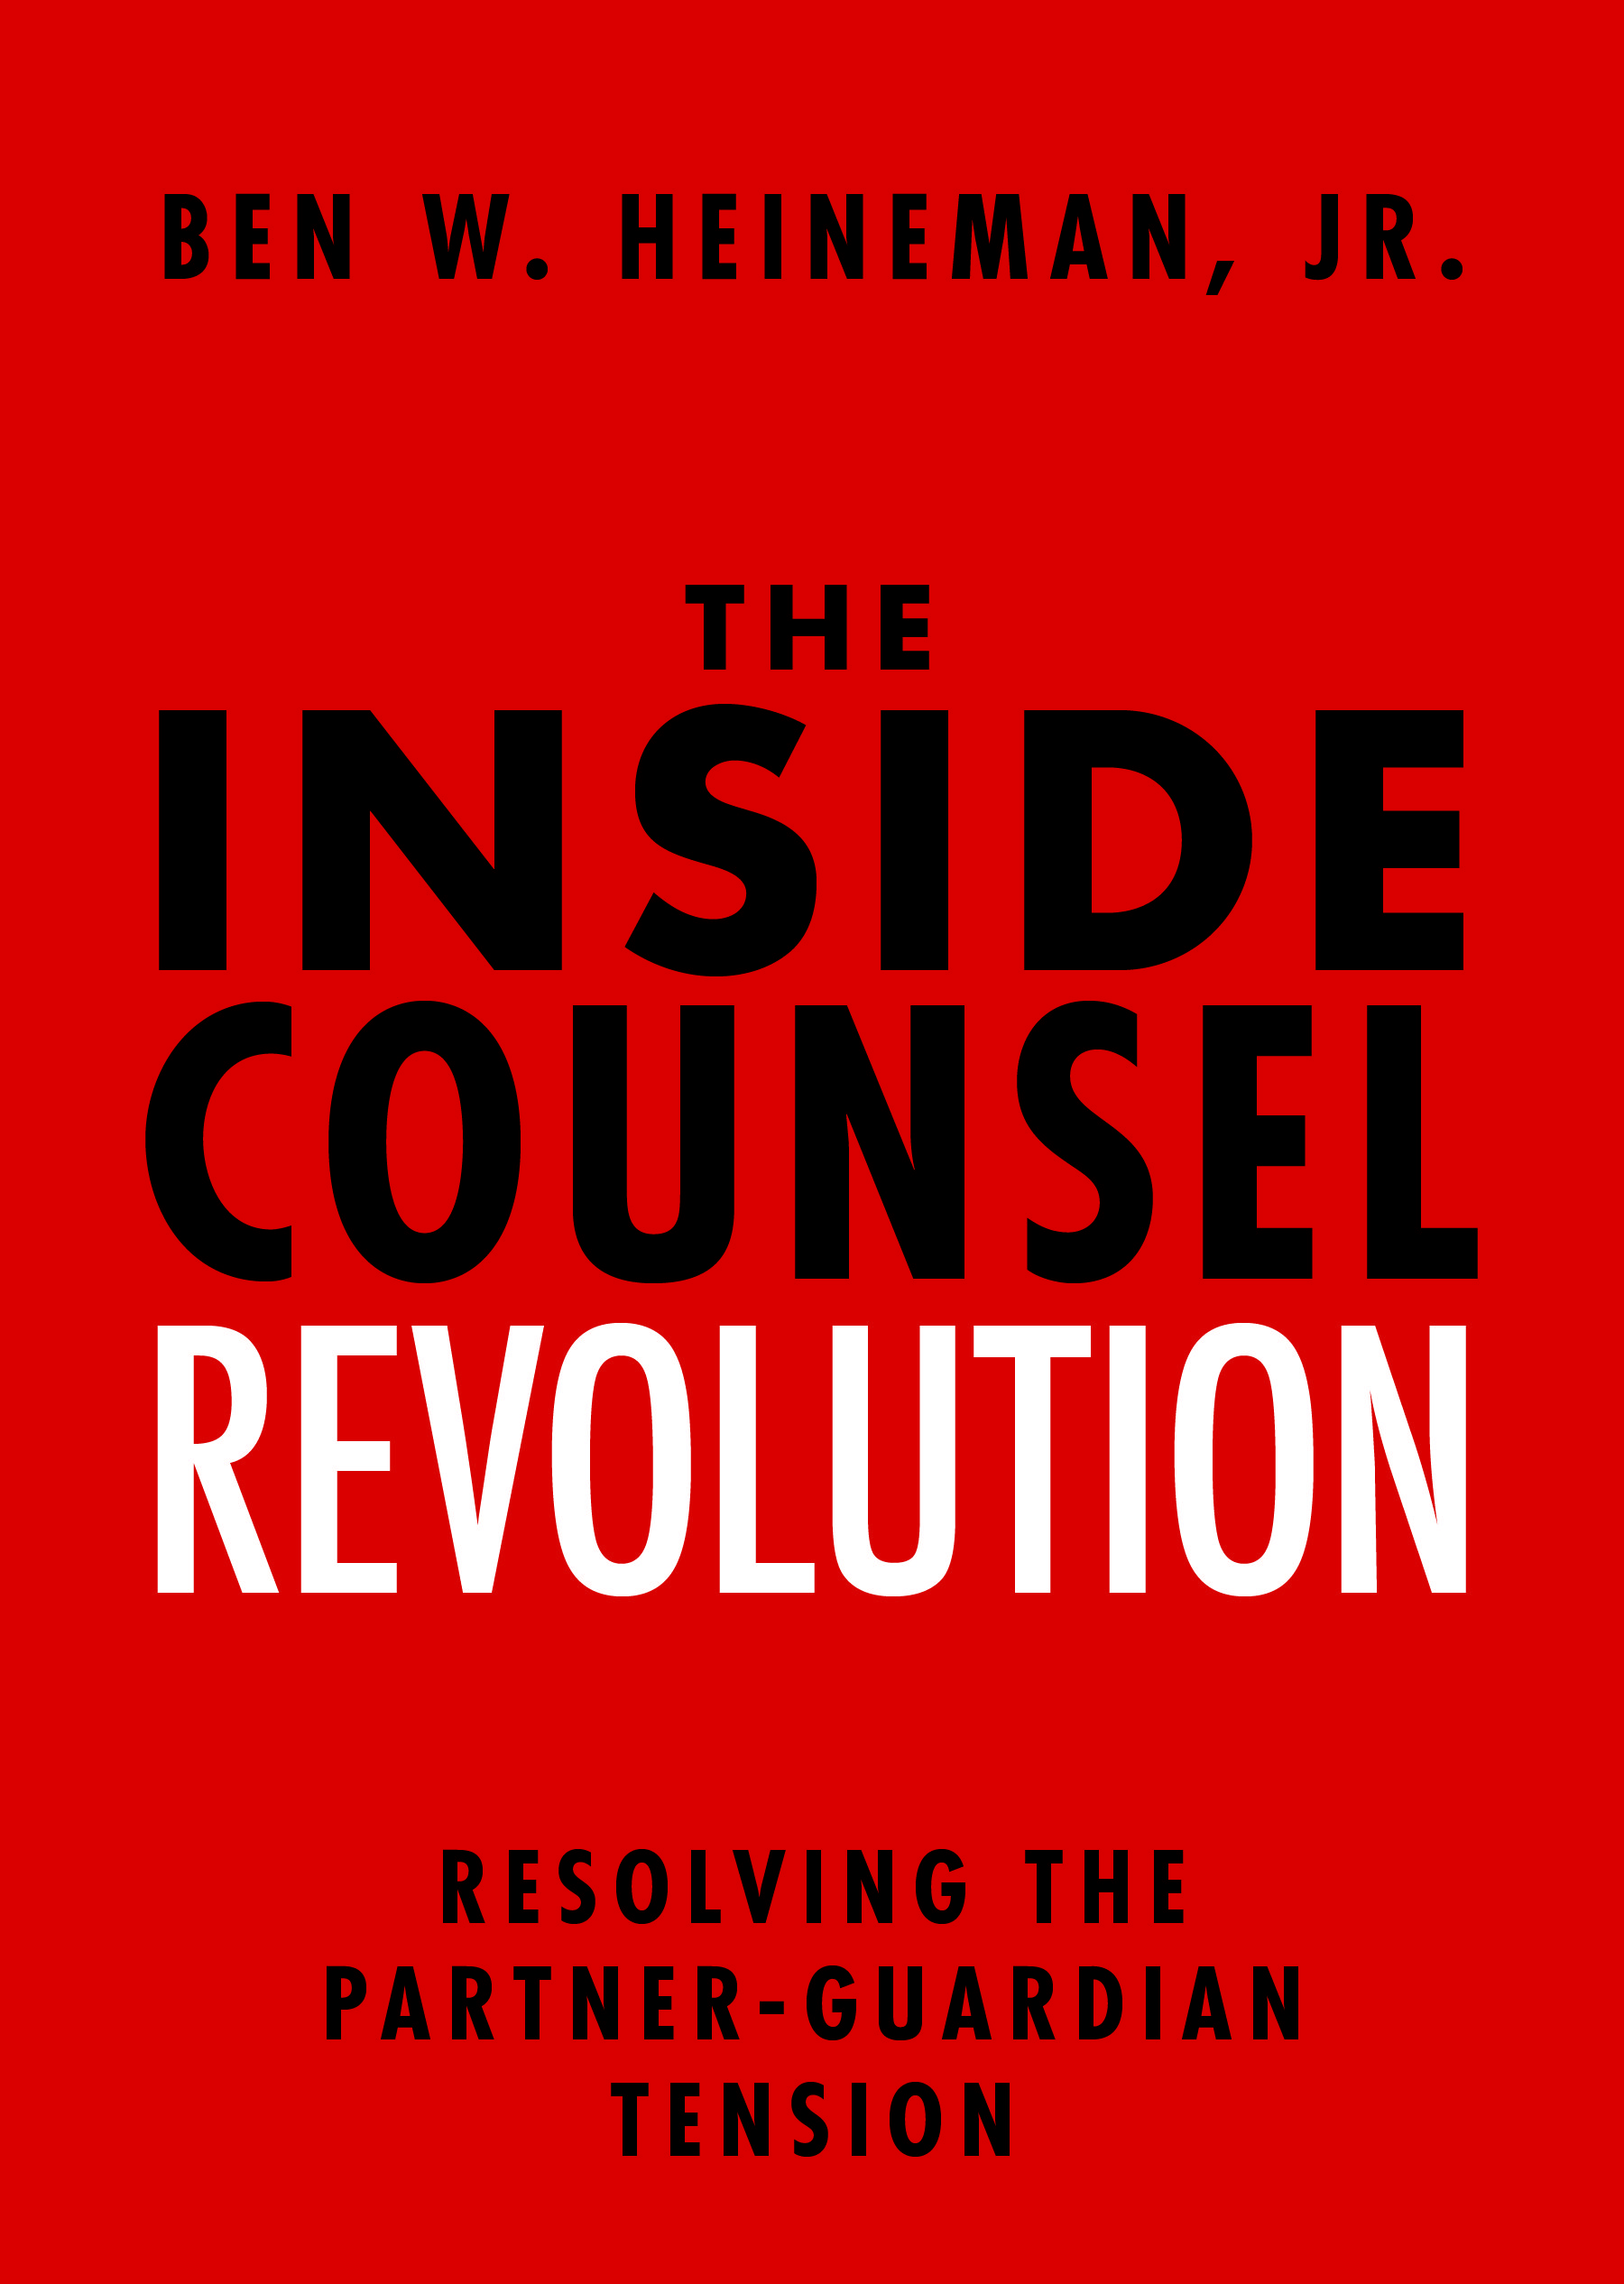 Book cover image of "The Inside Counsel Revolution"